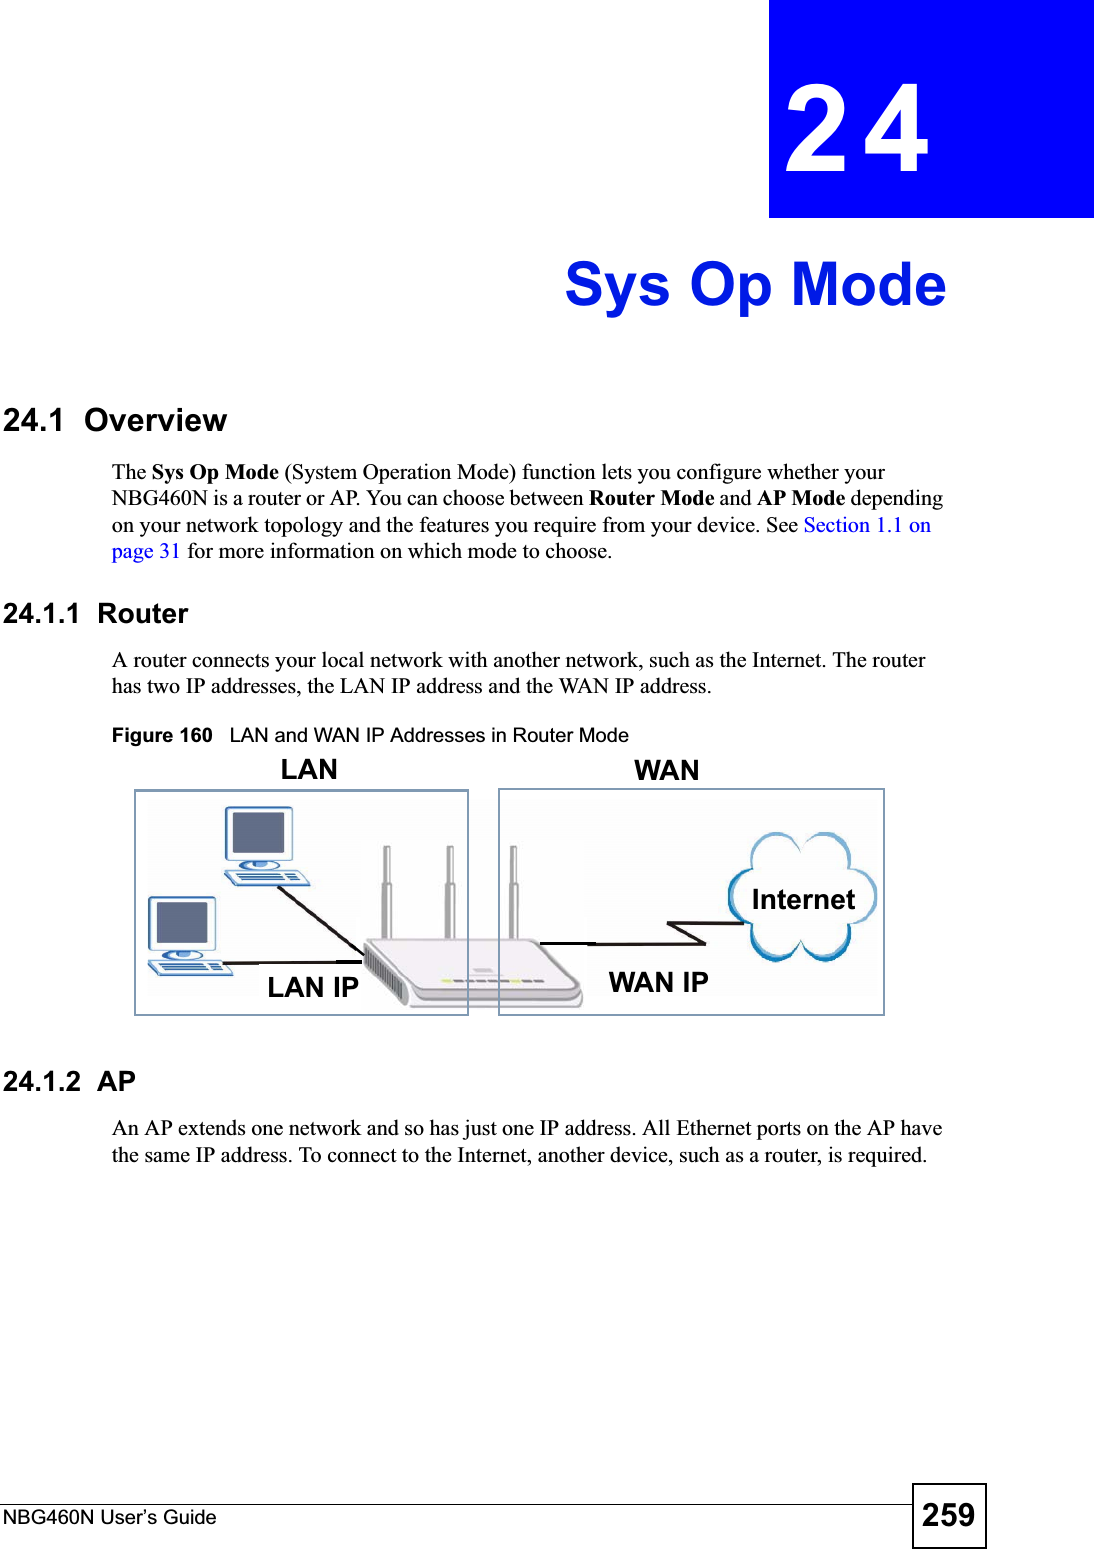 NBG460N User’s Guide 259CHAPTER 24Sys Op Mode24.1  OverviewThe Sys Op Mode (System Operation Mode) function lets you configure whether your NBG460N is a router or AP. You can choose between Router Mode and AP Mode depending on your network topology and the features you require from your device. See Section 1.1 on page 31 for more information on which mode to choose.24.1.1  Router A router connects your local network with another network, such as the Internet. The router has two IP addresses, the LAN IP address and the WAN IP address.Figure 160   LAN and WAN IP Addresses in Router Mode24.1.2  AP An AP extends one network and so has just one IP address. All Ethernet ports on the AP have the same IP address. To connect to the Internet, another device, such as a router, is required.WAN IPInternetLAN WANLAN IP